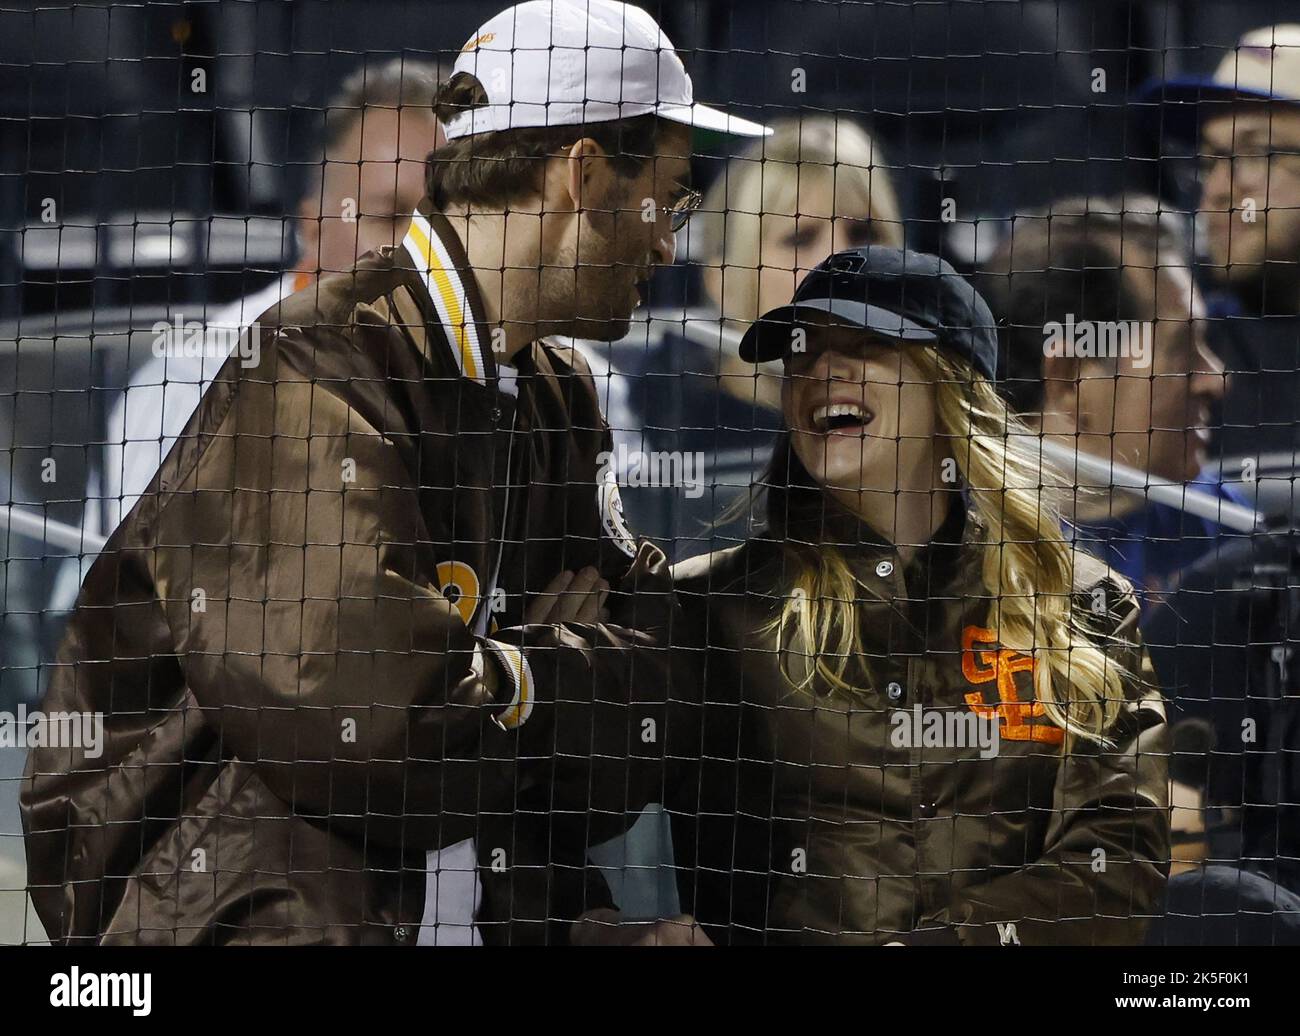 Emma Stone and Dave McCary Have Date Night at a Padres Game